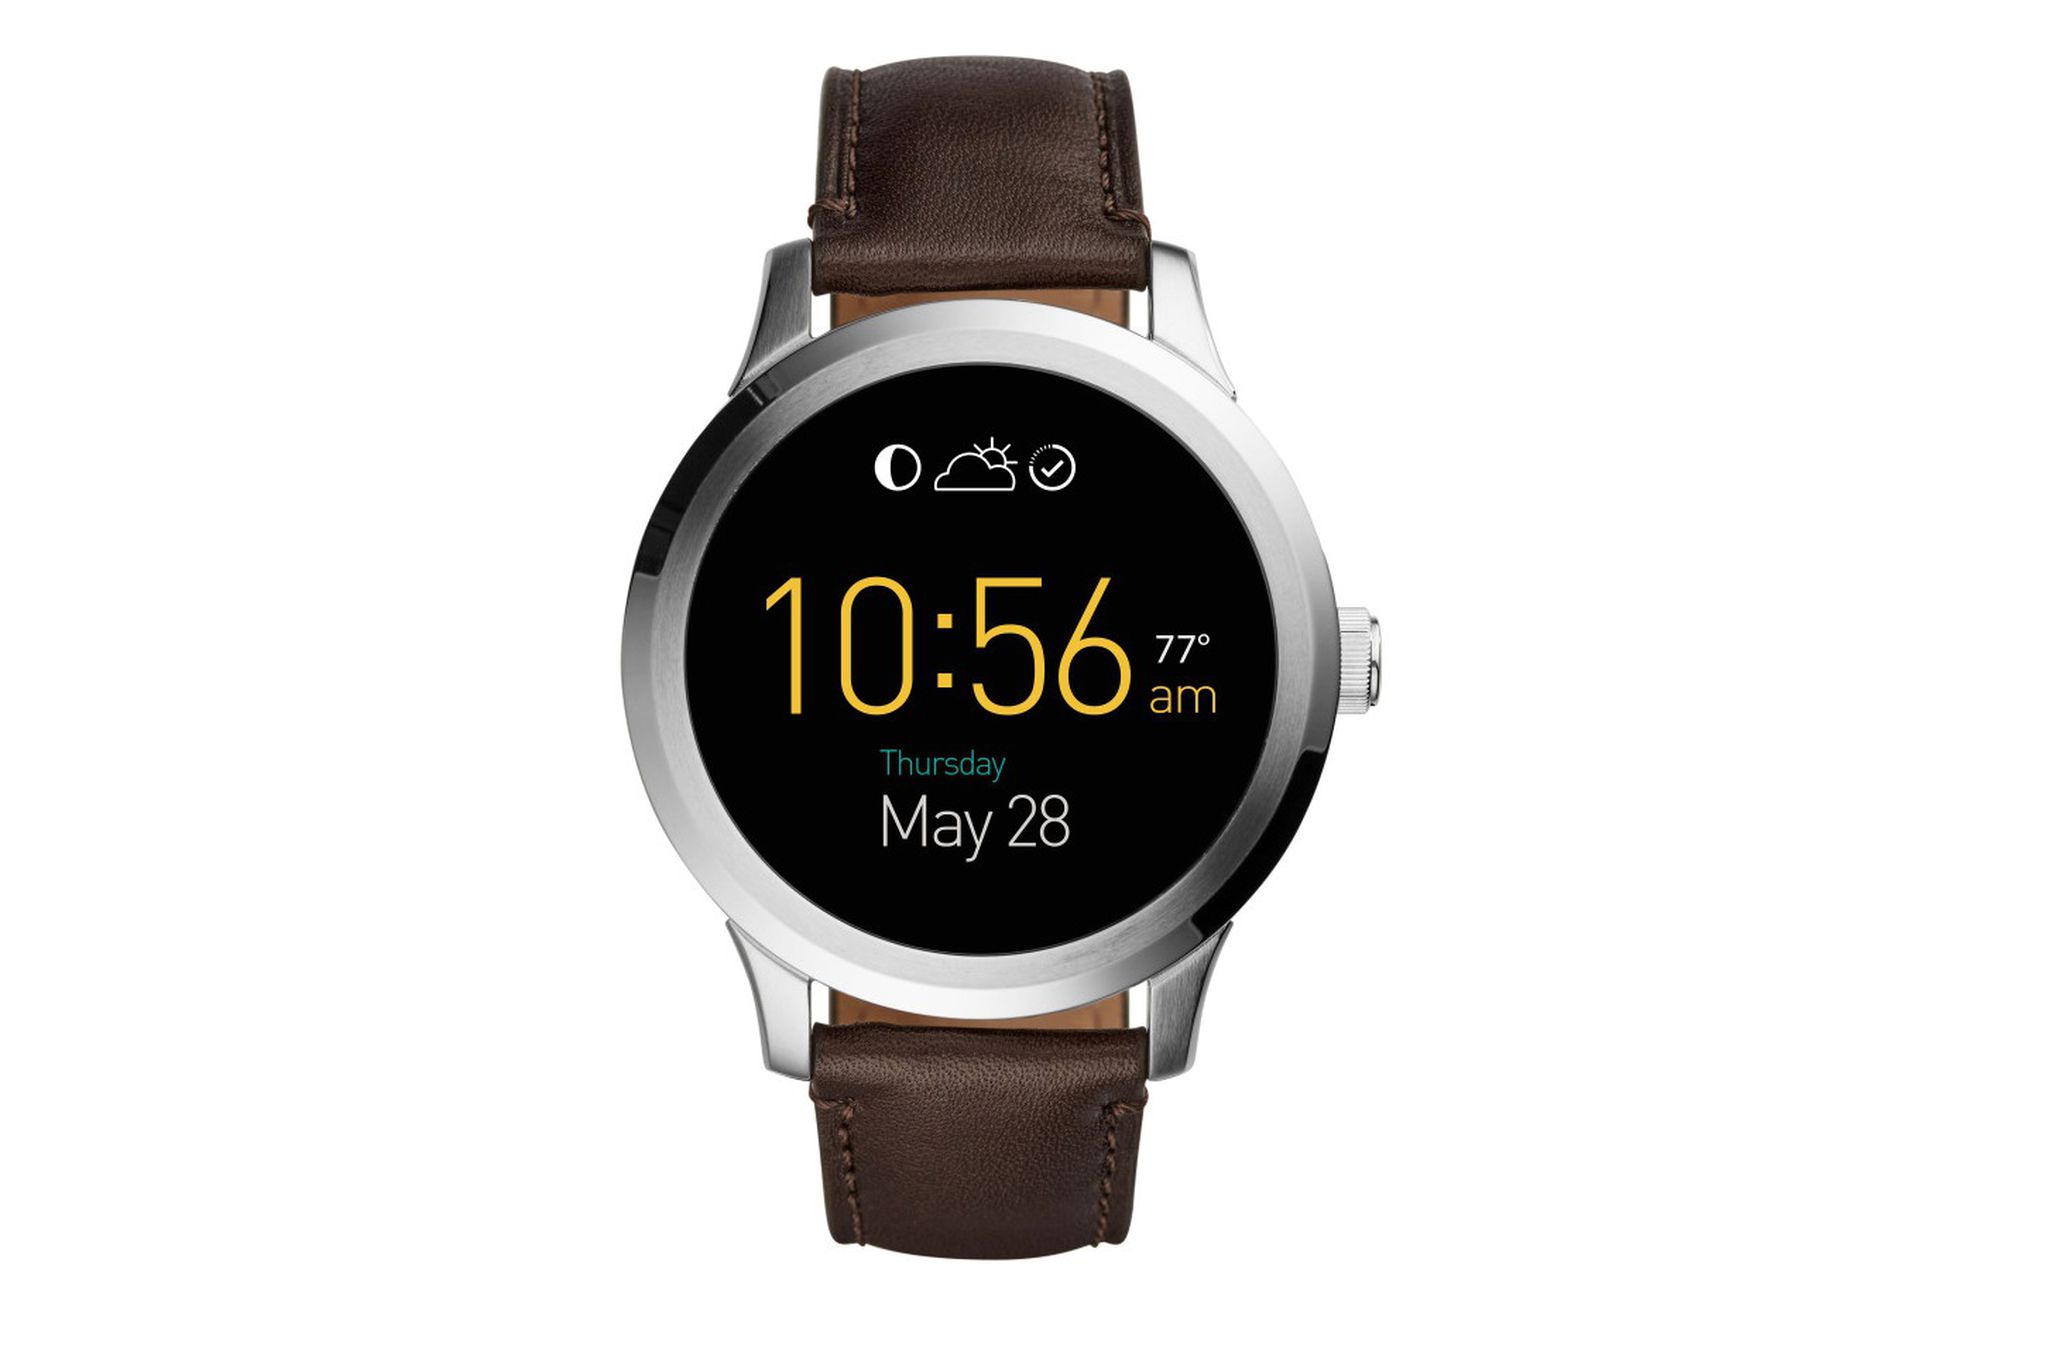 Fossil reveals its Android Wear smartwatch - The Verge